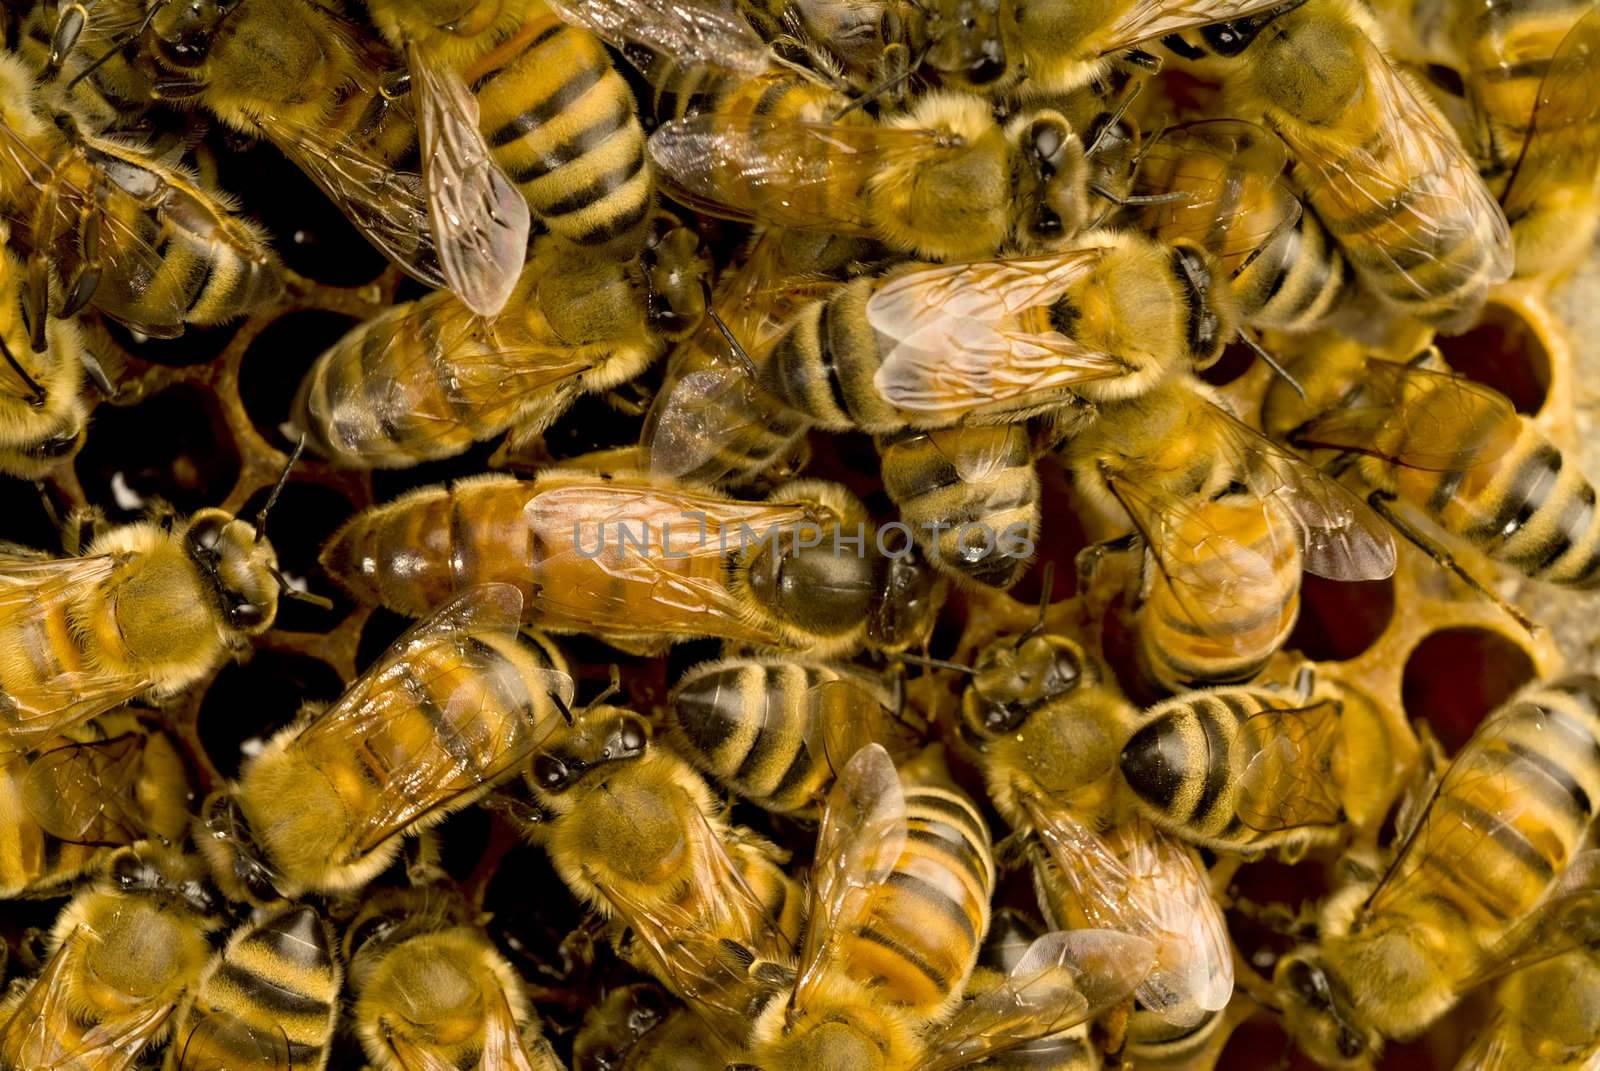 Bees inside a beehive with the queen bee in the middle 